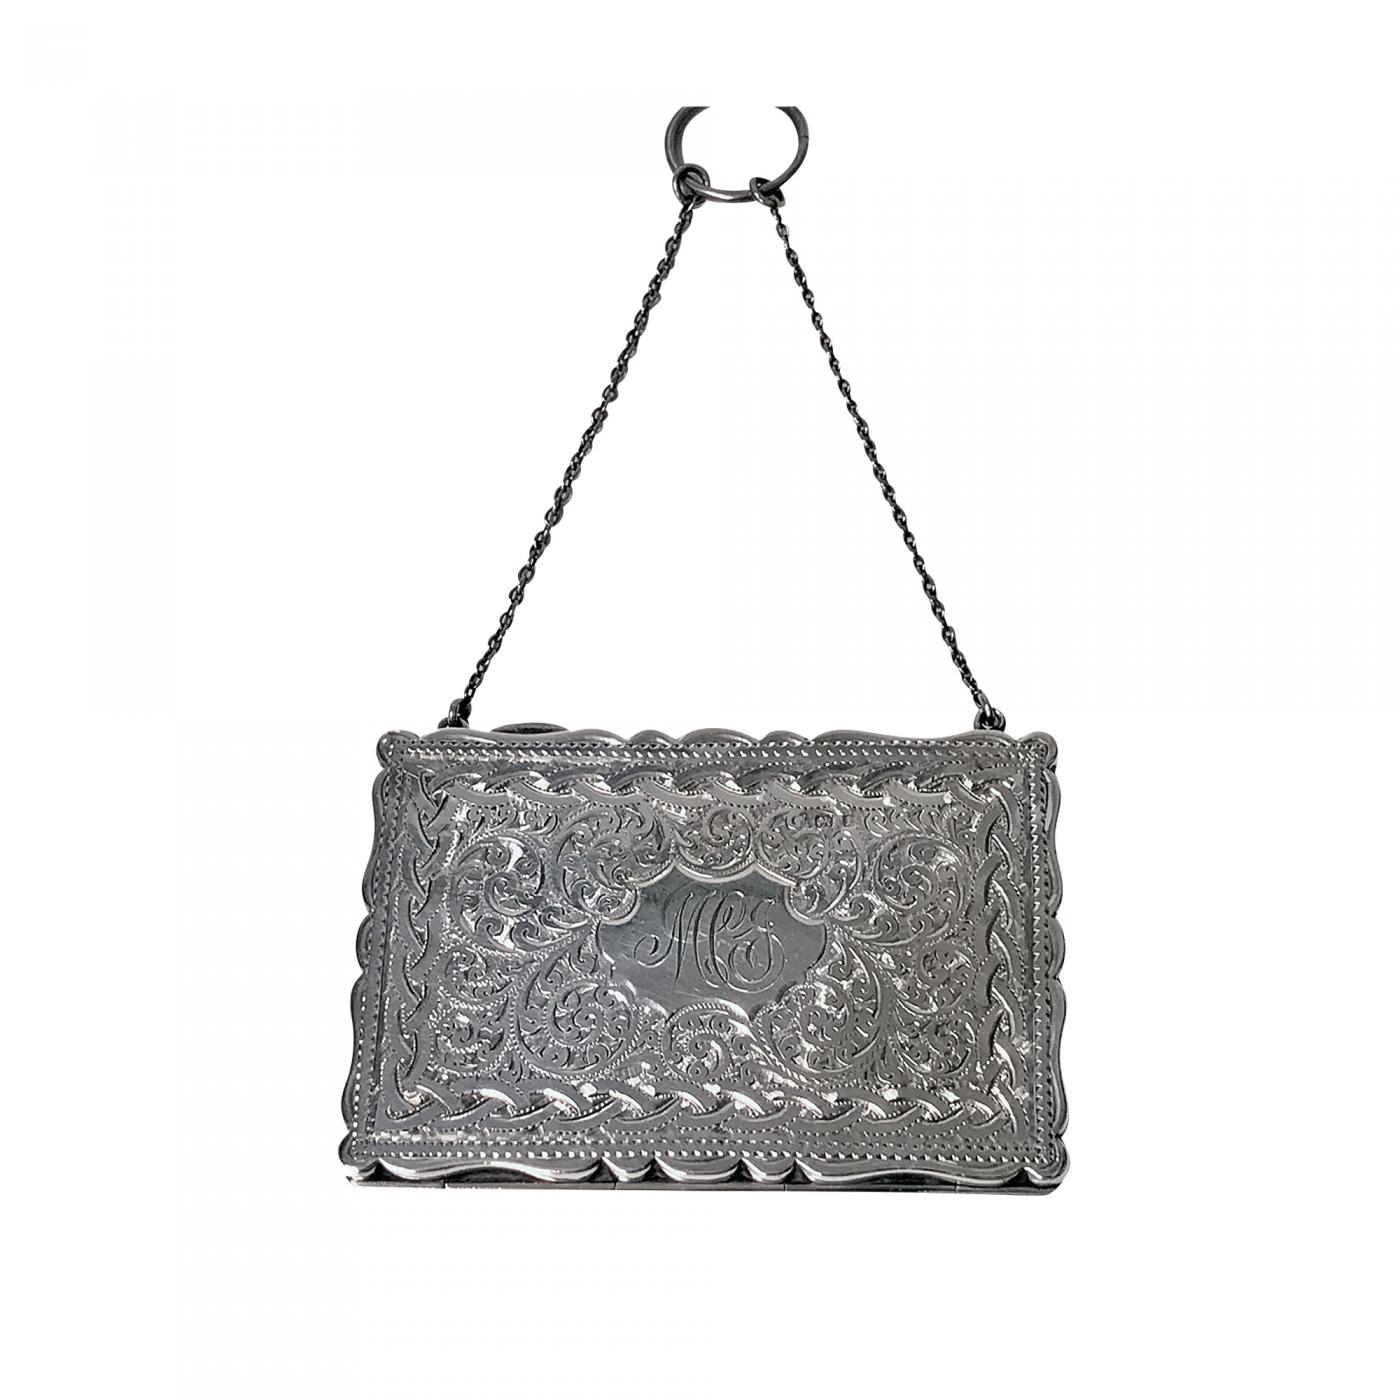 Vintage Mesh Purse Antique French Sterling Silver Bag Engraved Stock Photo  - Download Image Now - iStock